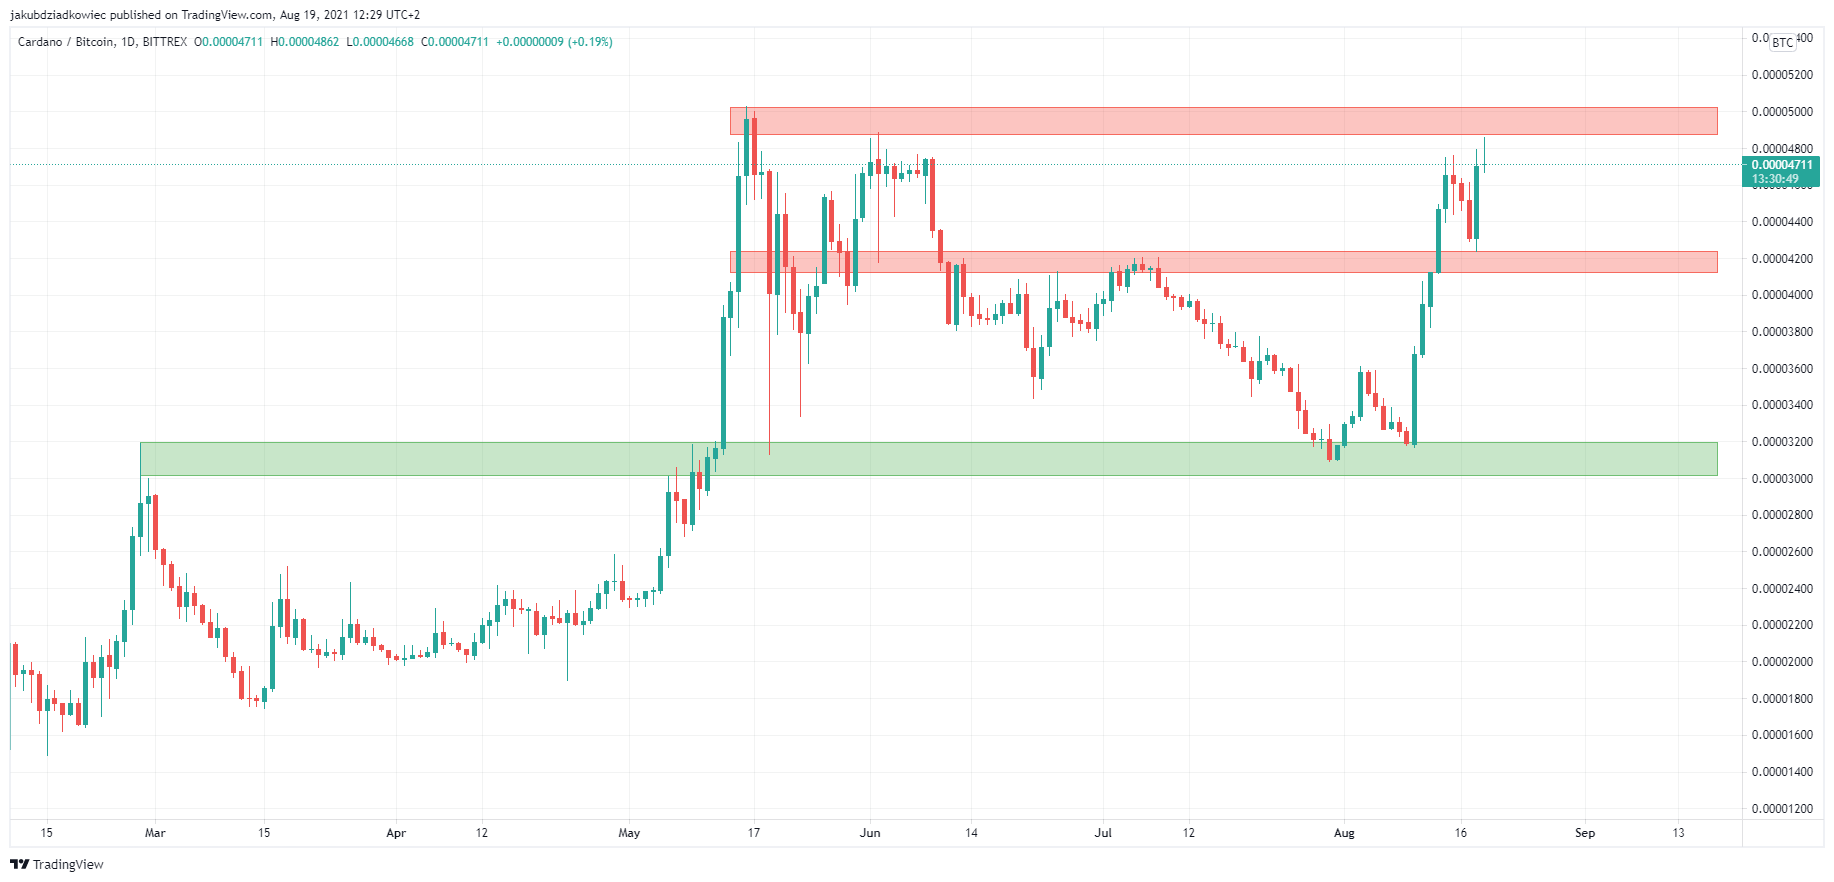 Cardano (ADA) Creates Higher Low and Reclaims $2 Level